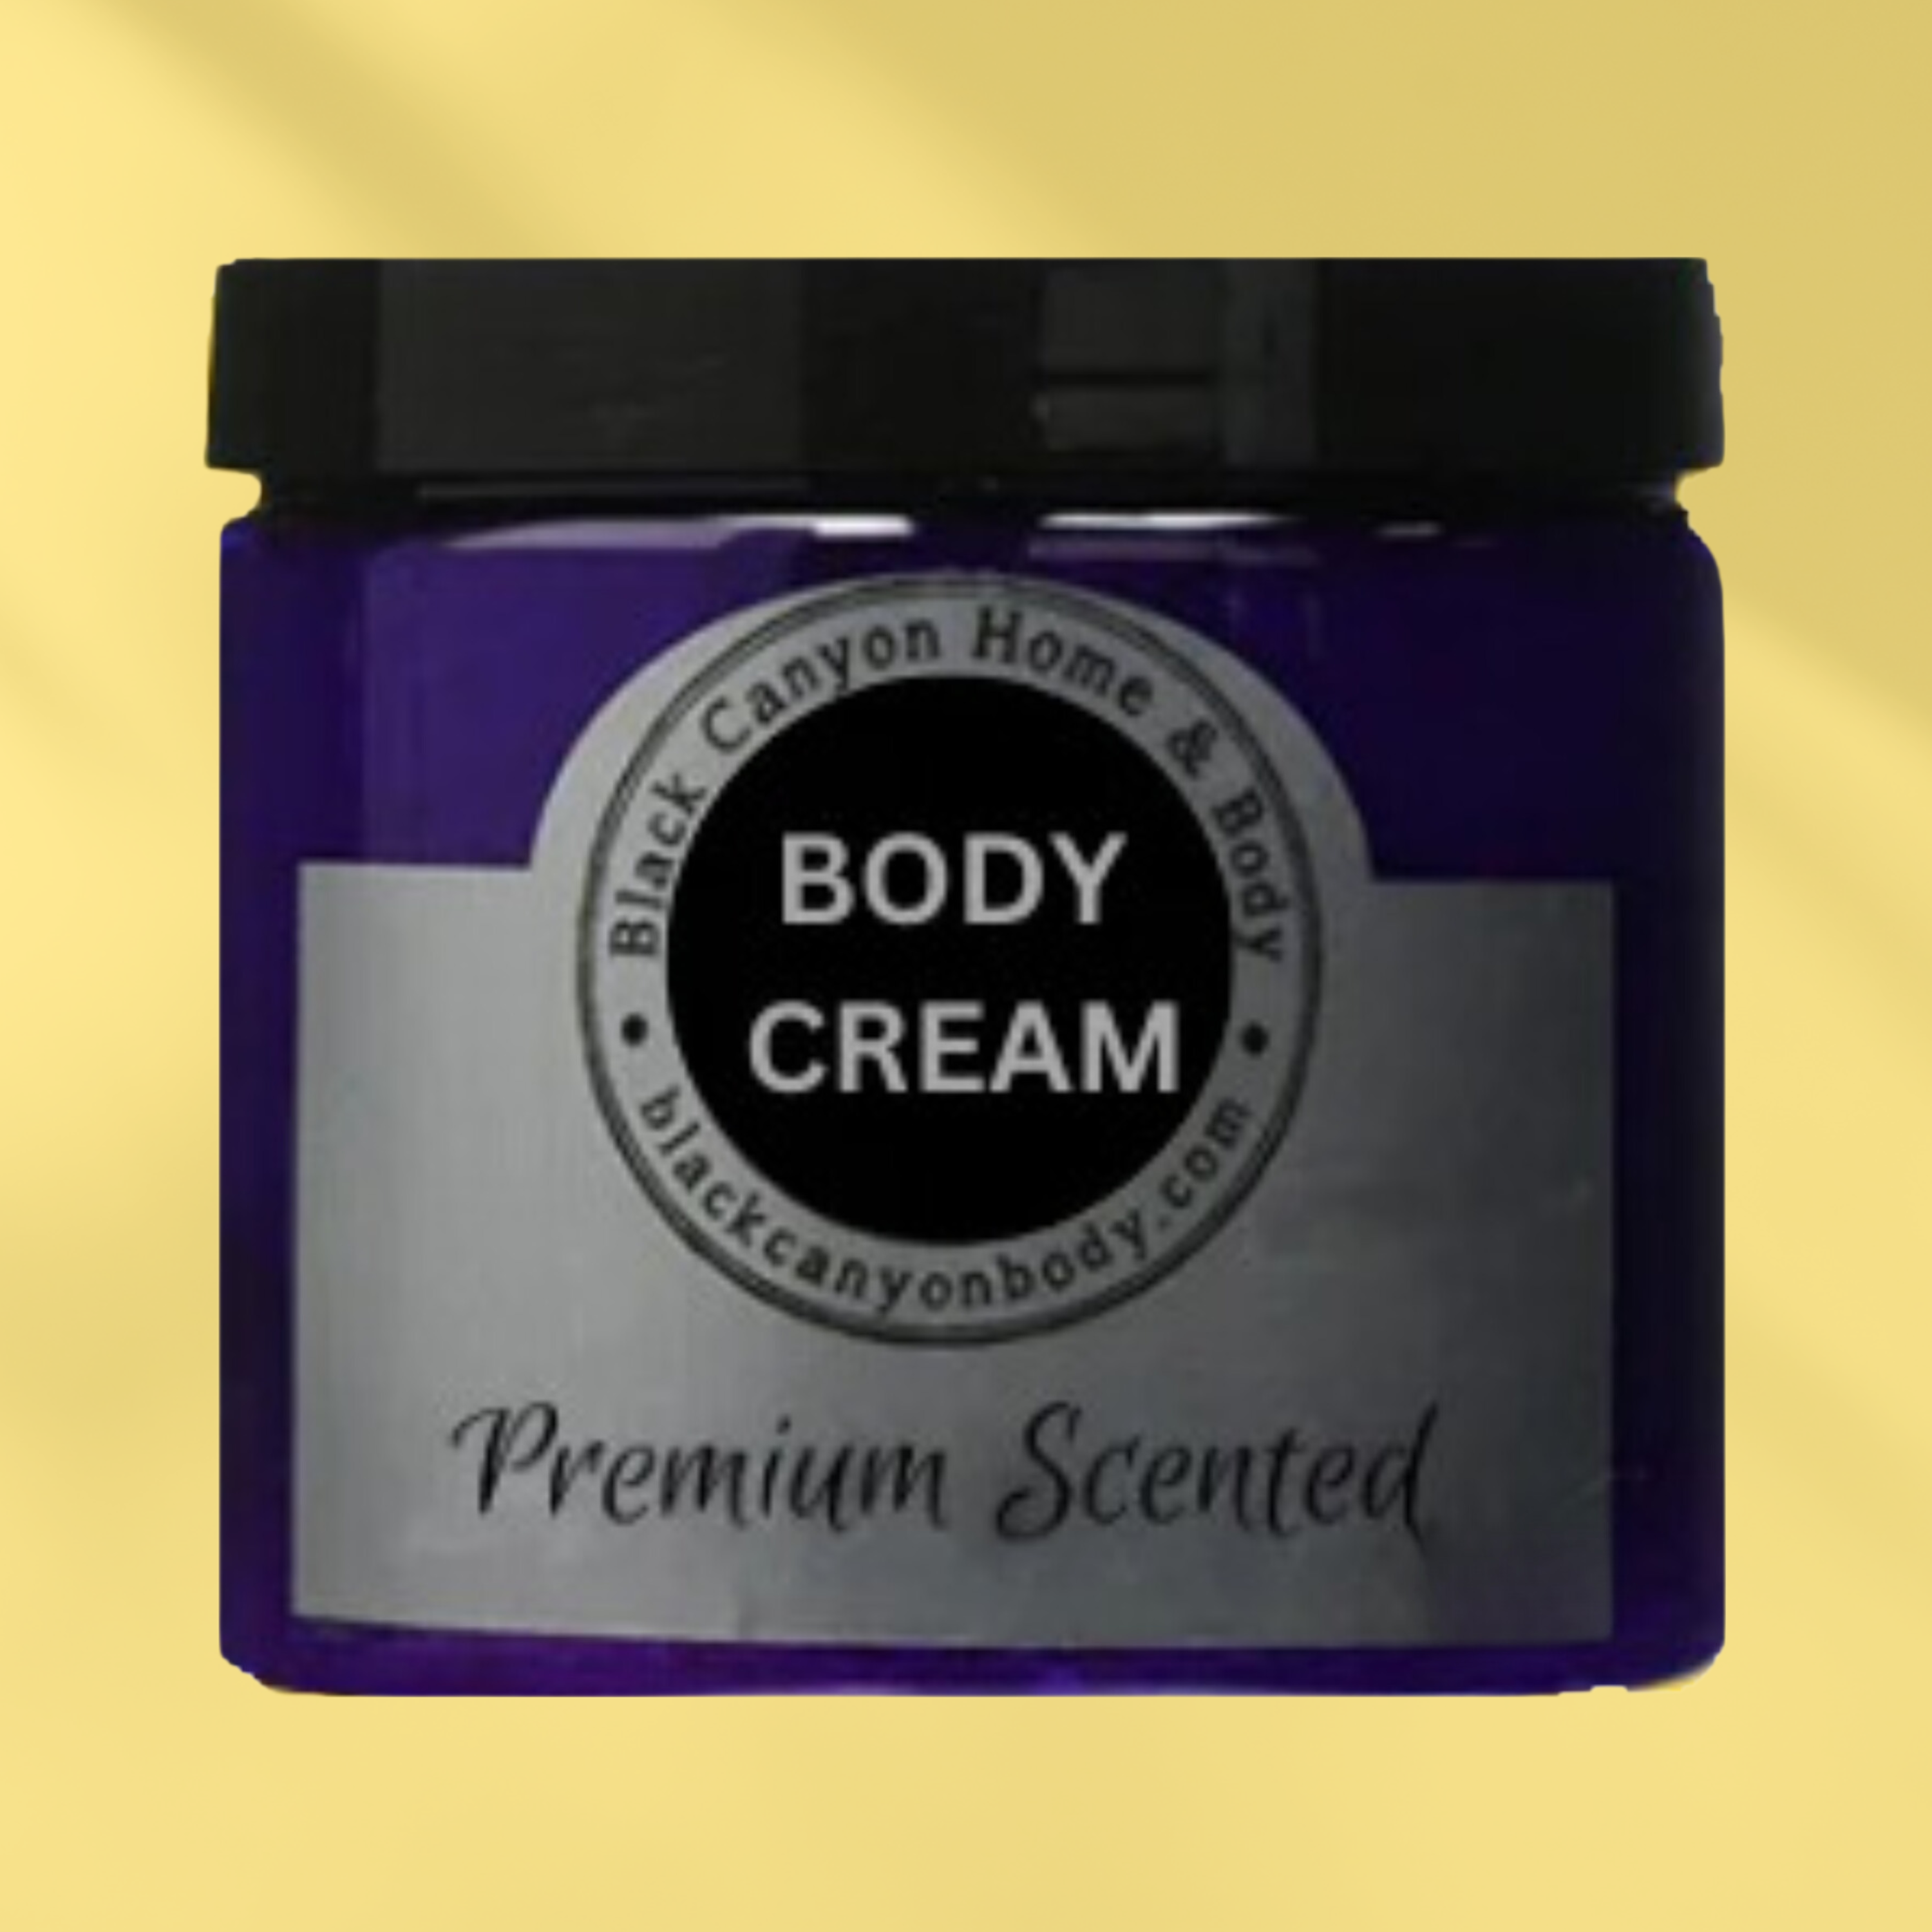 Paydens Cobalt Chocolate Temptation Scented Luxury Body Cream with Aloe For Men